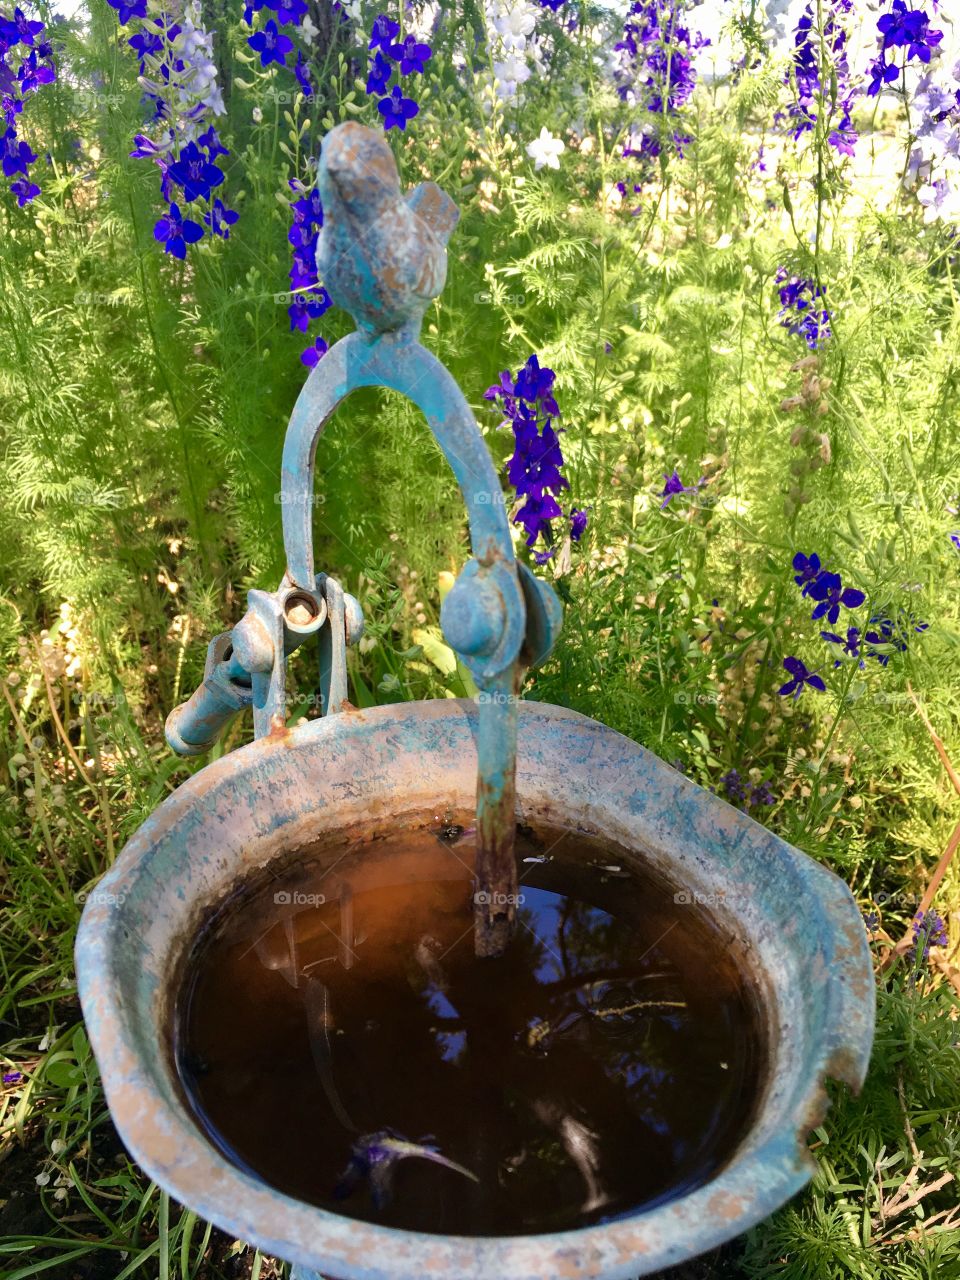 Perfectly rusted bird bath with not so perfect water.